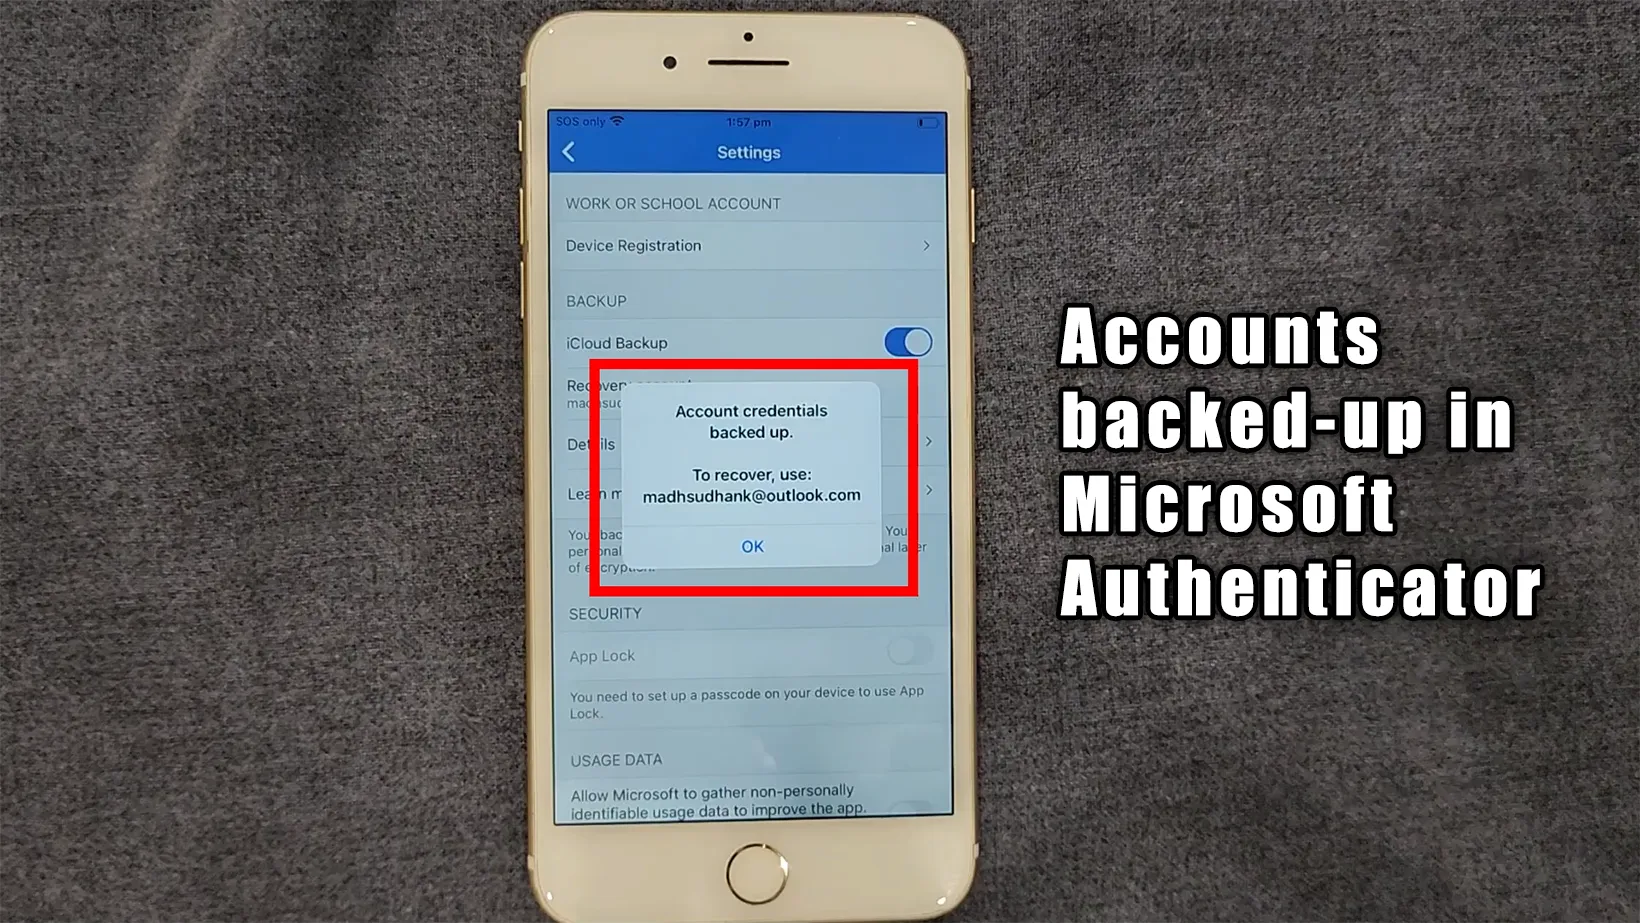 Accounts backed-up in Microsoft  Authenticator